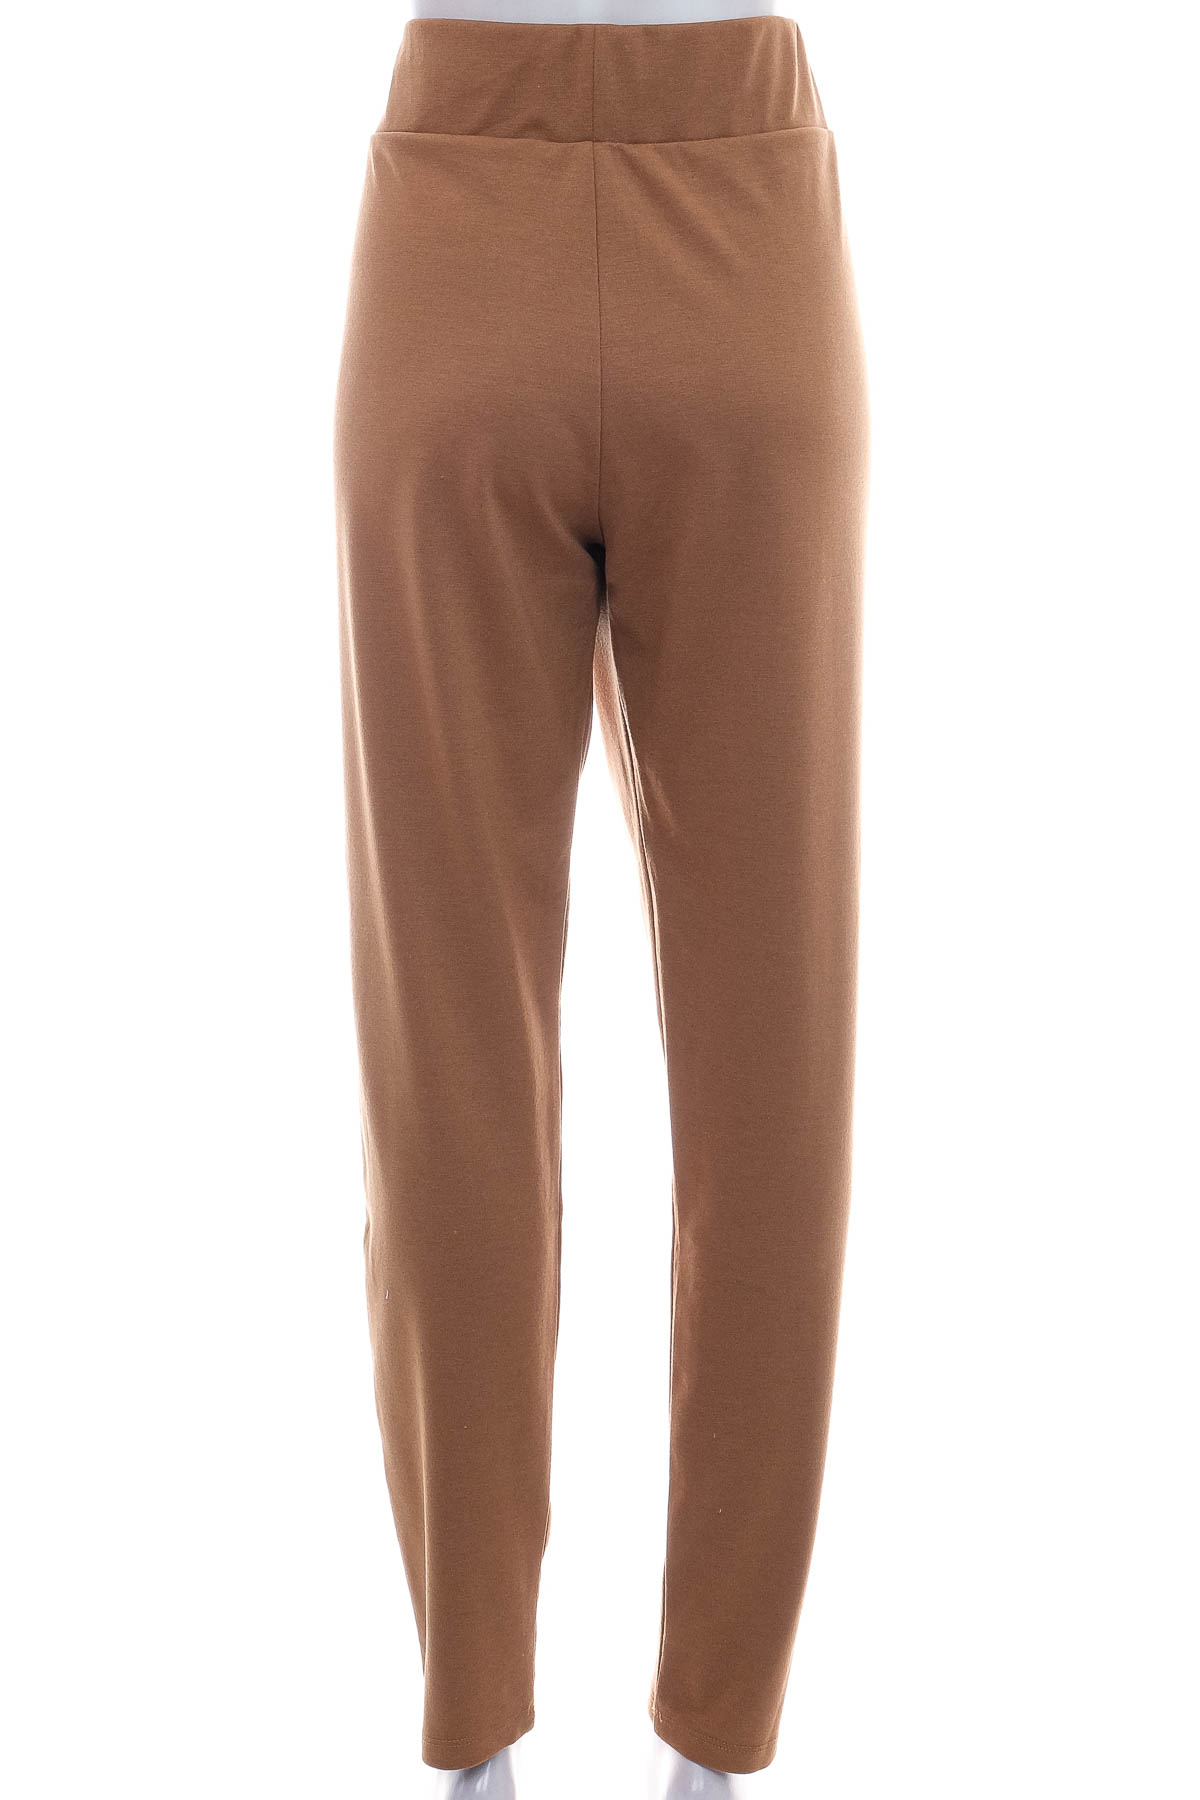 Women's trousers - XL COLLECTION - 1